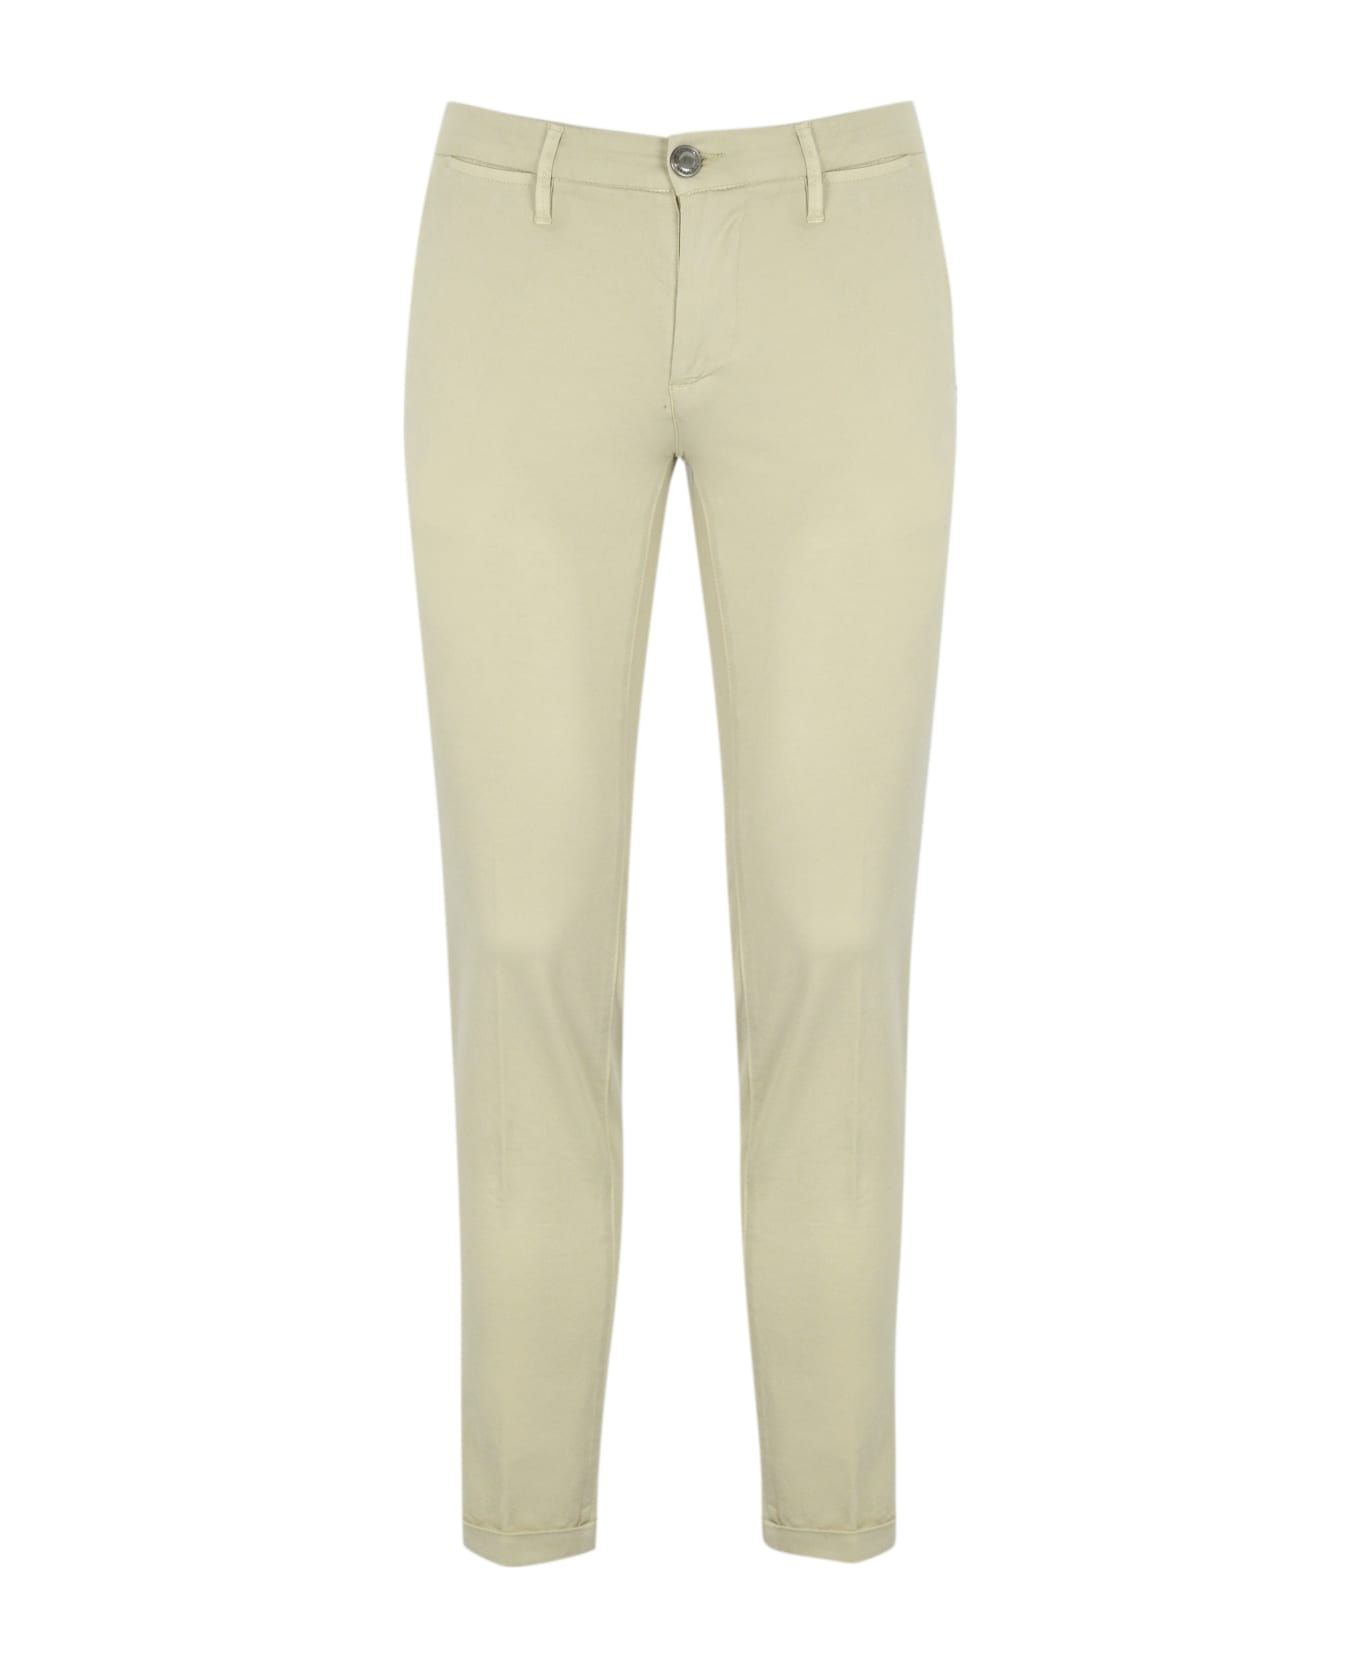 Re-HasH Chino Trousers - Beige ボトムス